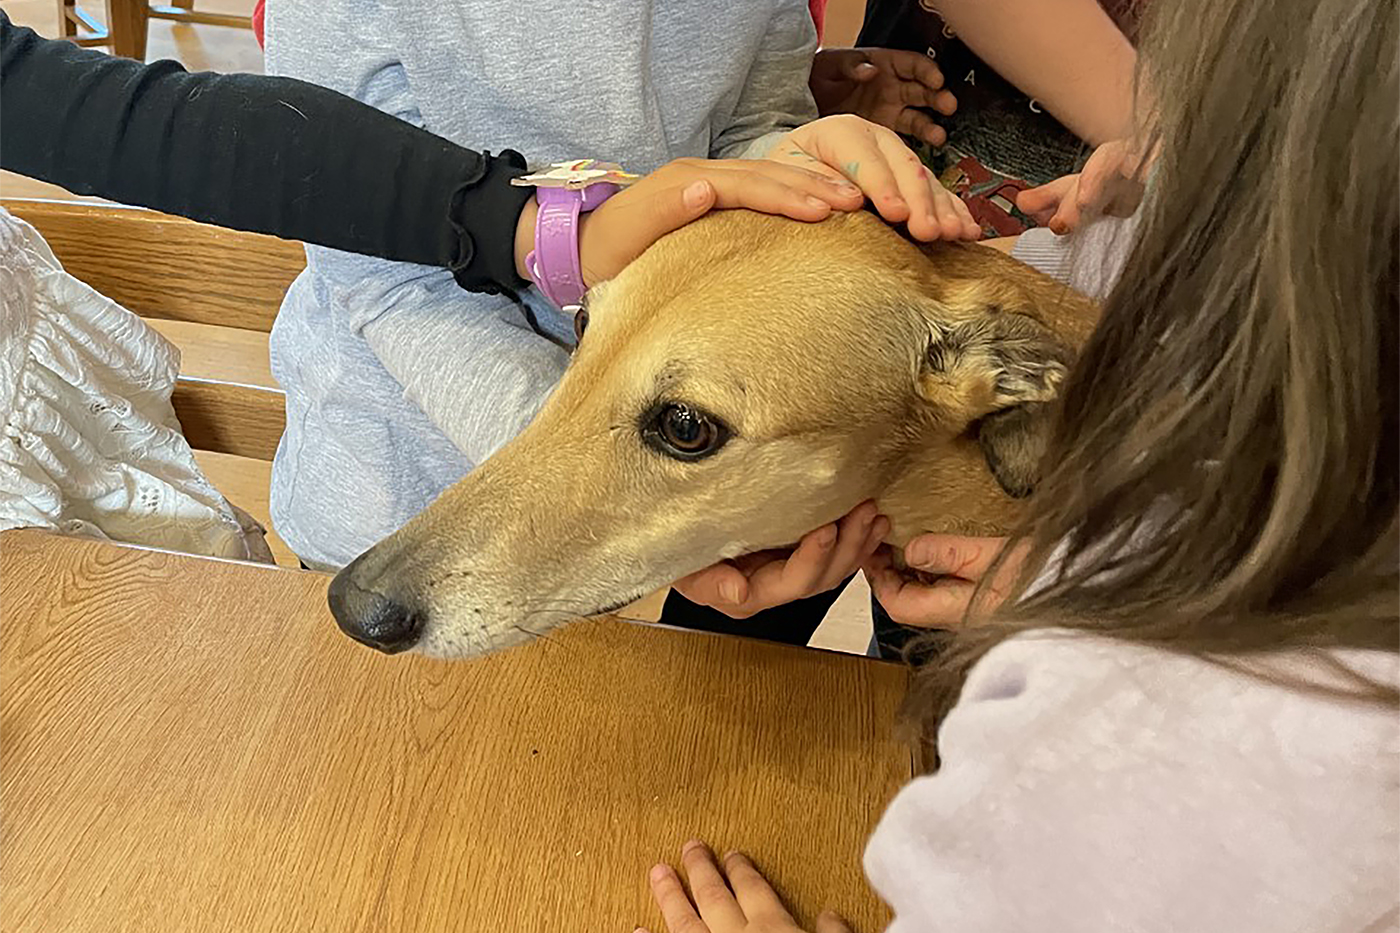 Cascade, a fawn-colored greyhound dog, is petted by children.